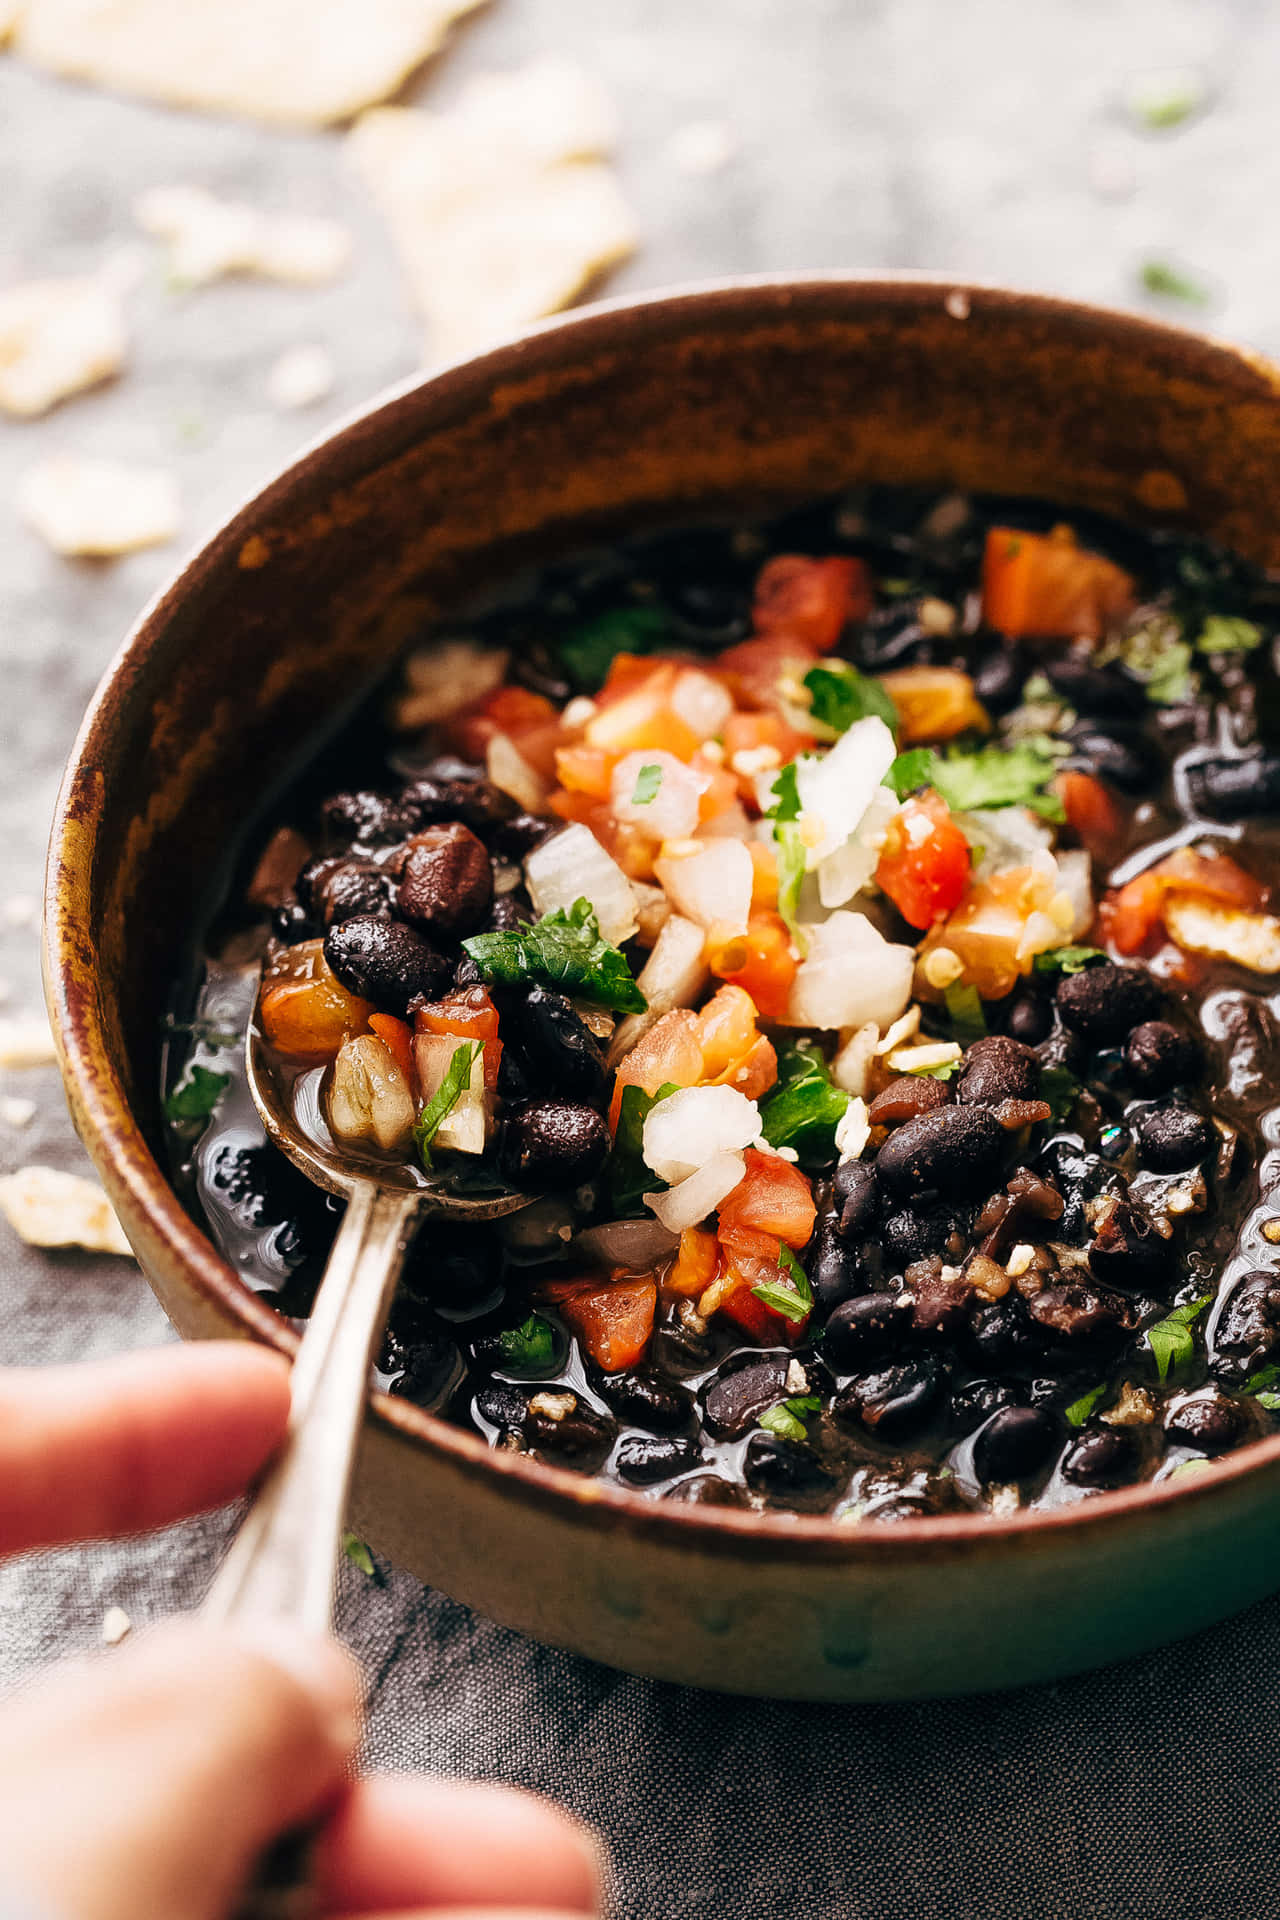 This hearty black bean soup makes for the perfect autumn meal. Wallpaper